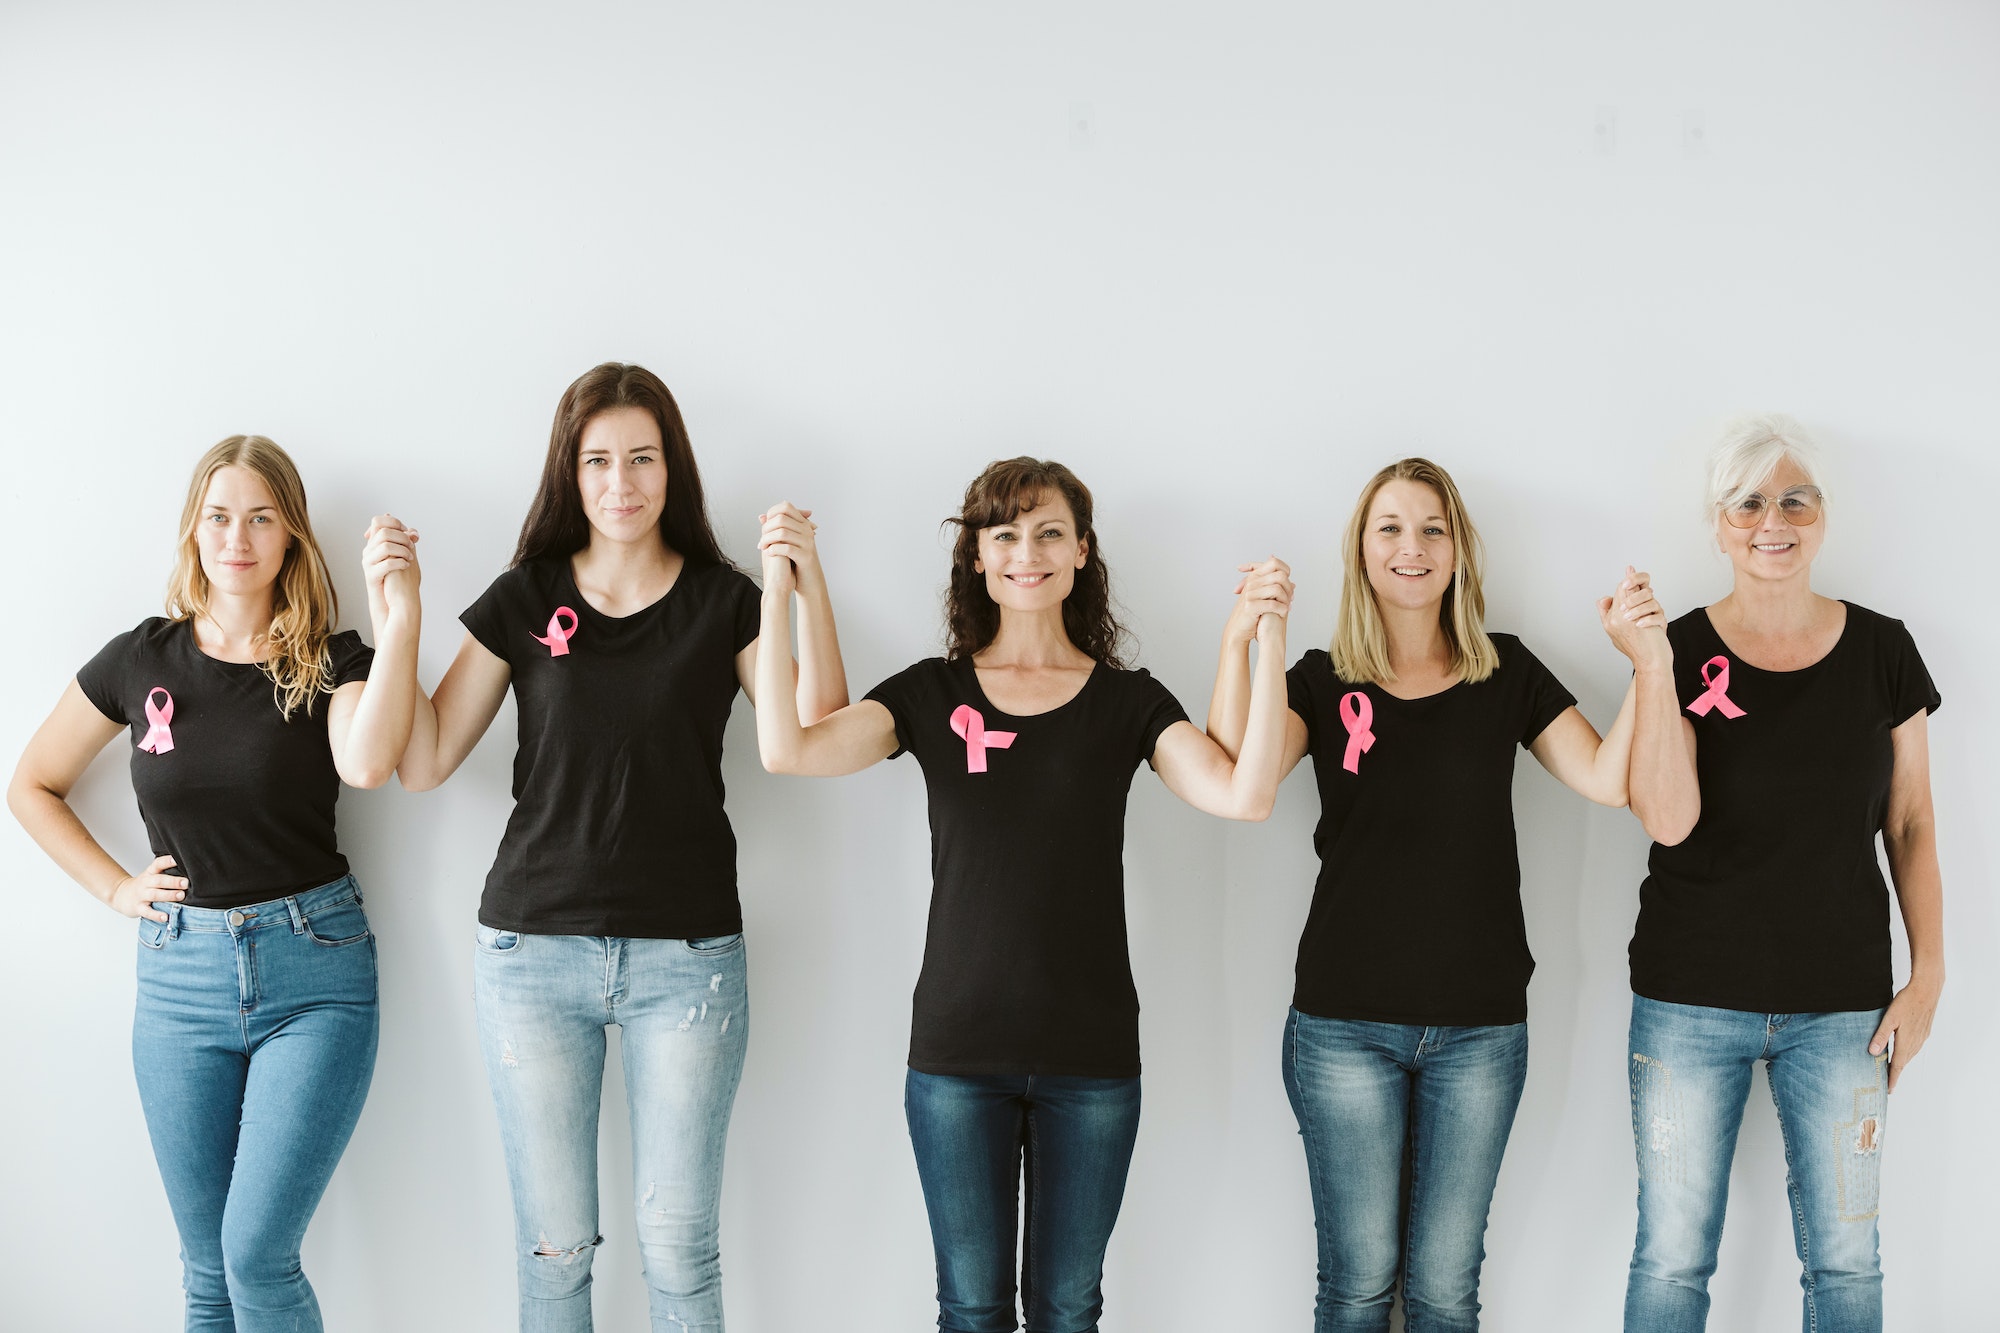 Five women in black tshirts and blue jeans standing together